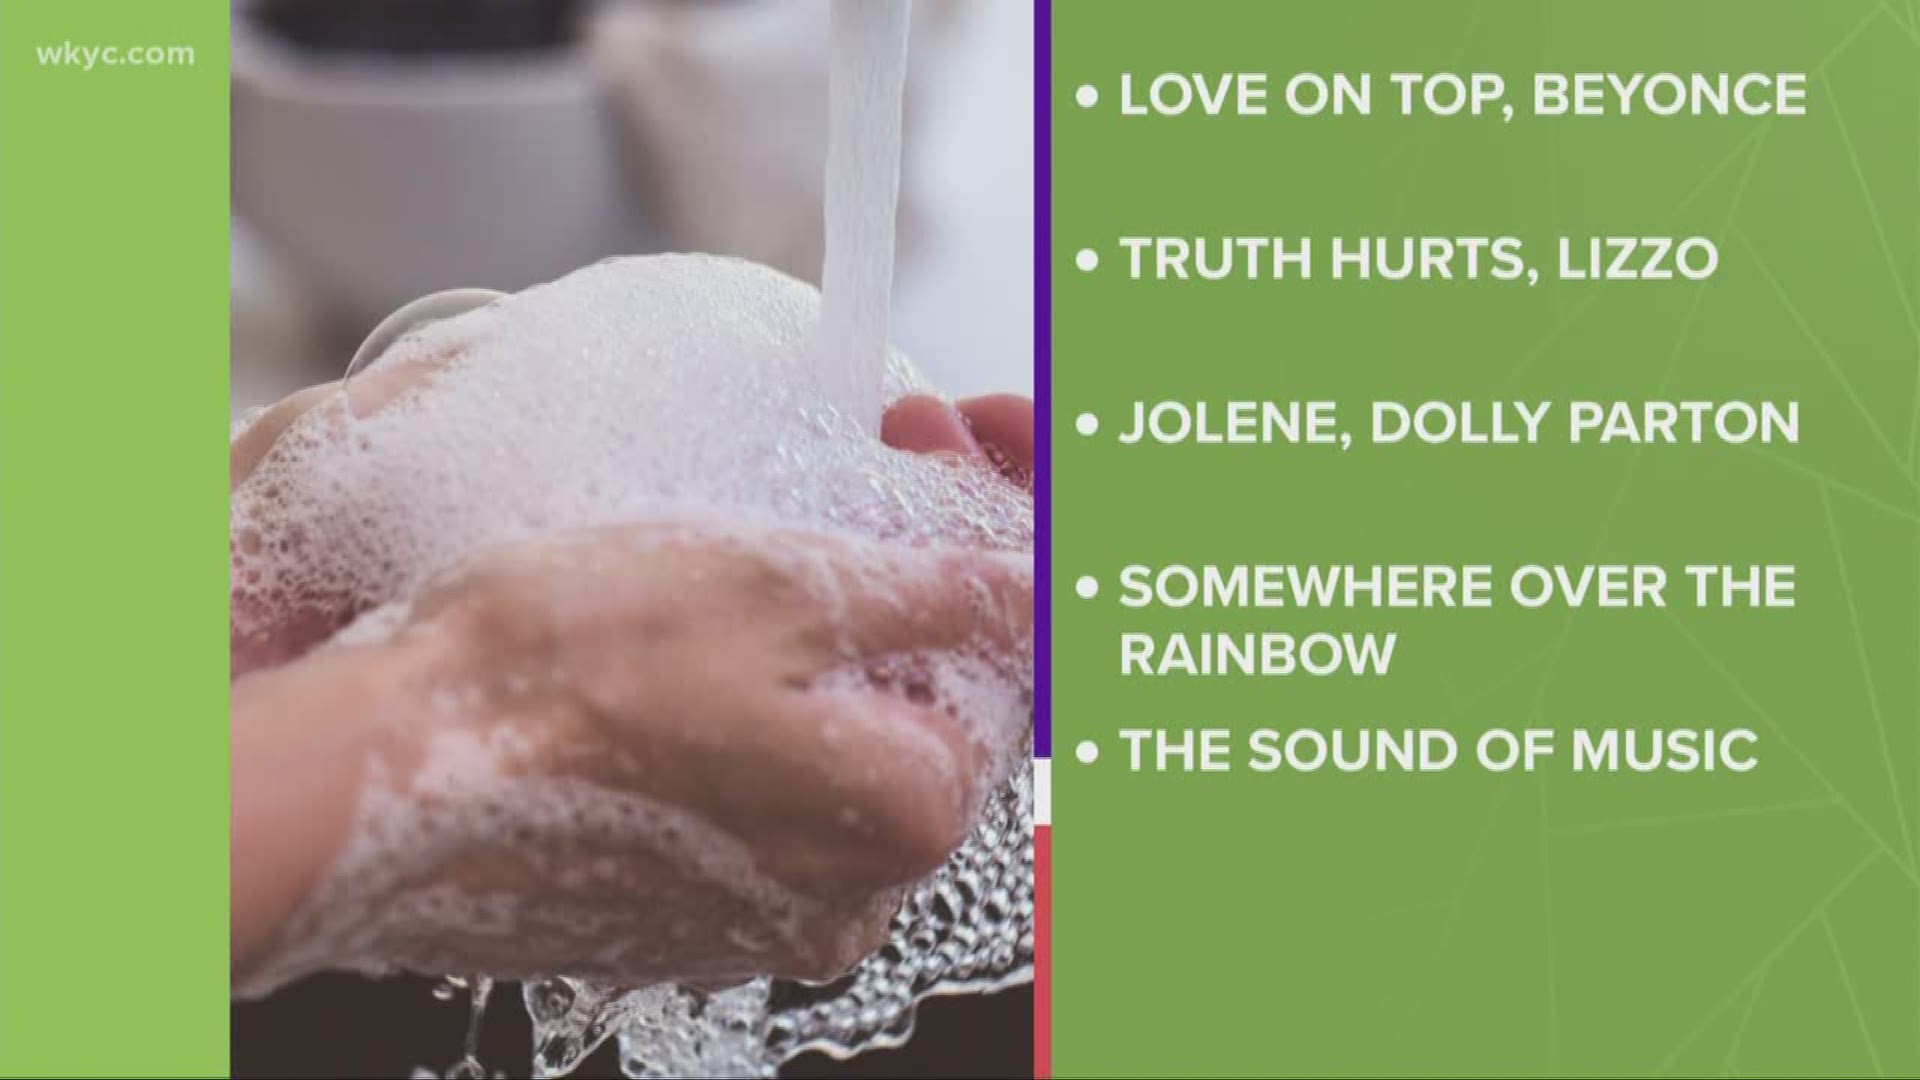 The CDC says you need to wash your hands for at least 20 seconds. Here are some unique songs to help you get it done.